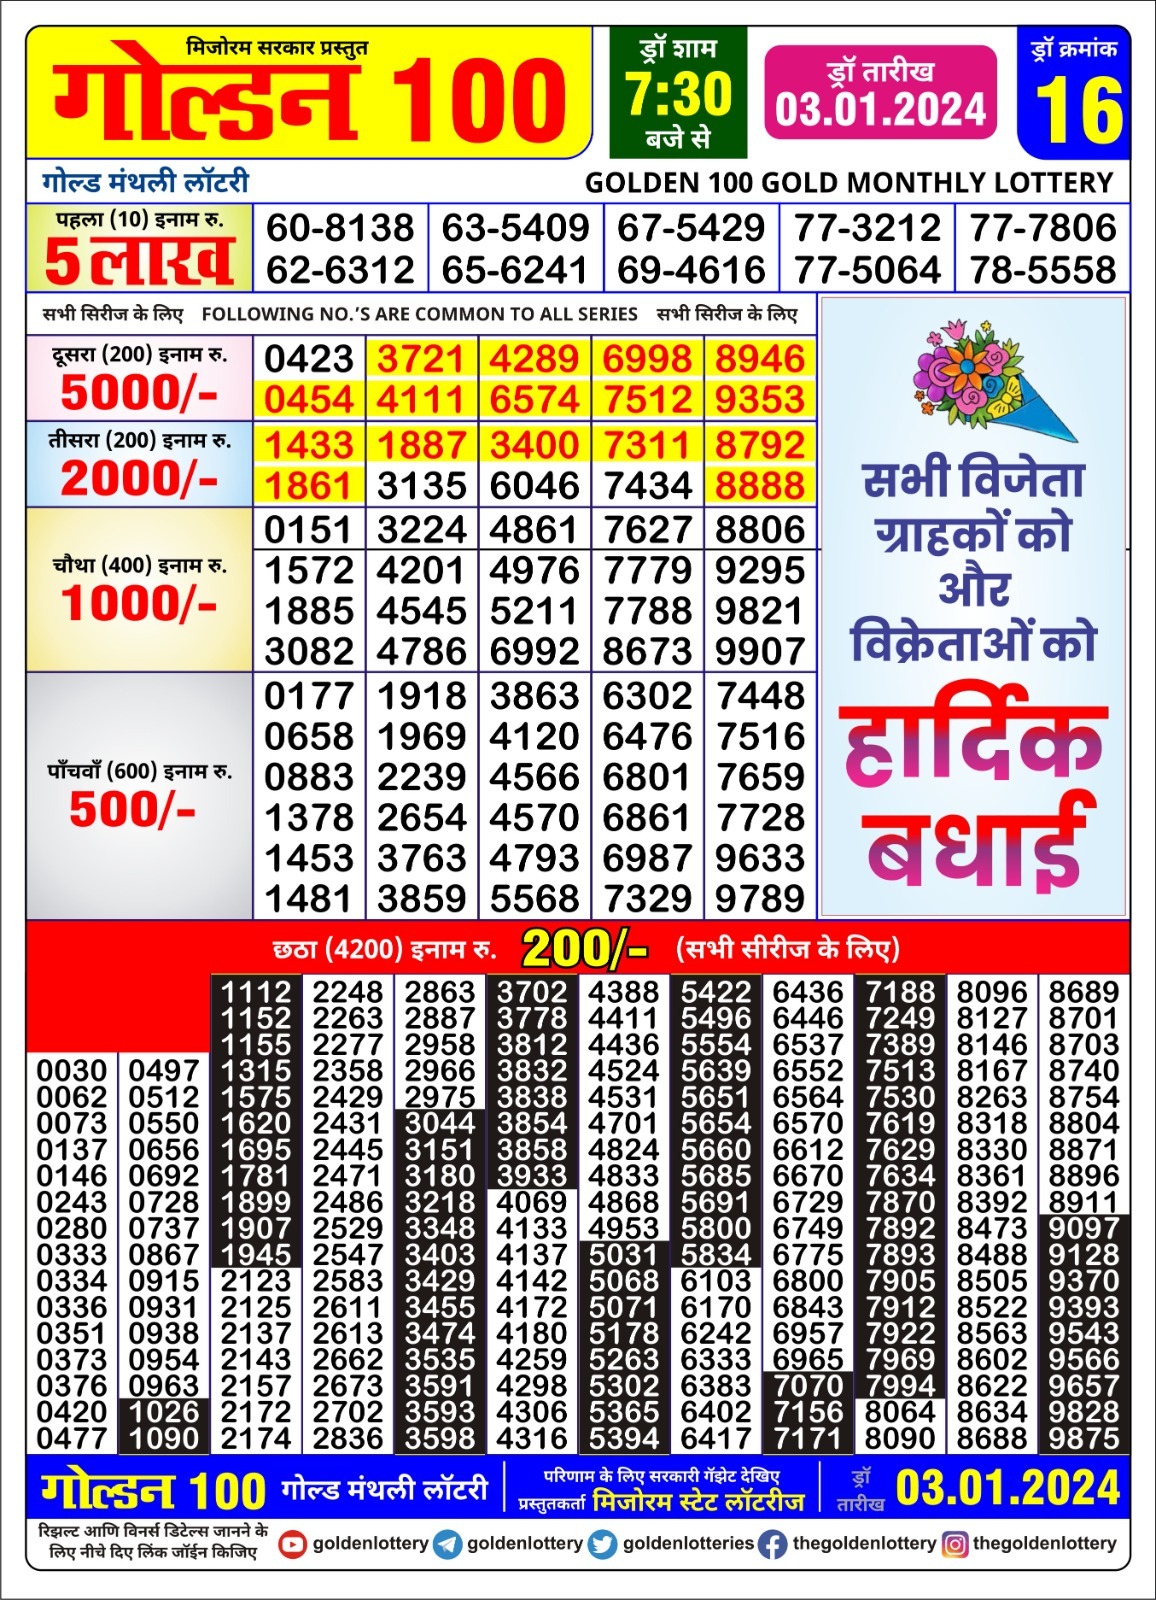 Golden Monthly Lottery Result,730 pm. 03.01.2024 All Lottery Result